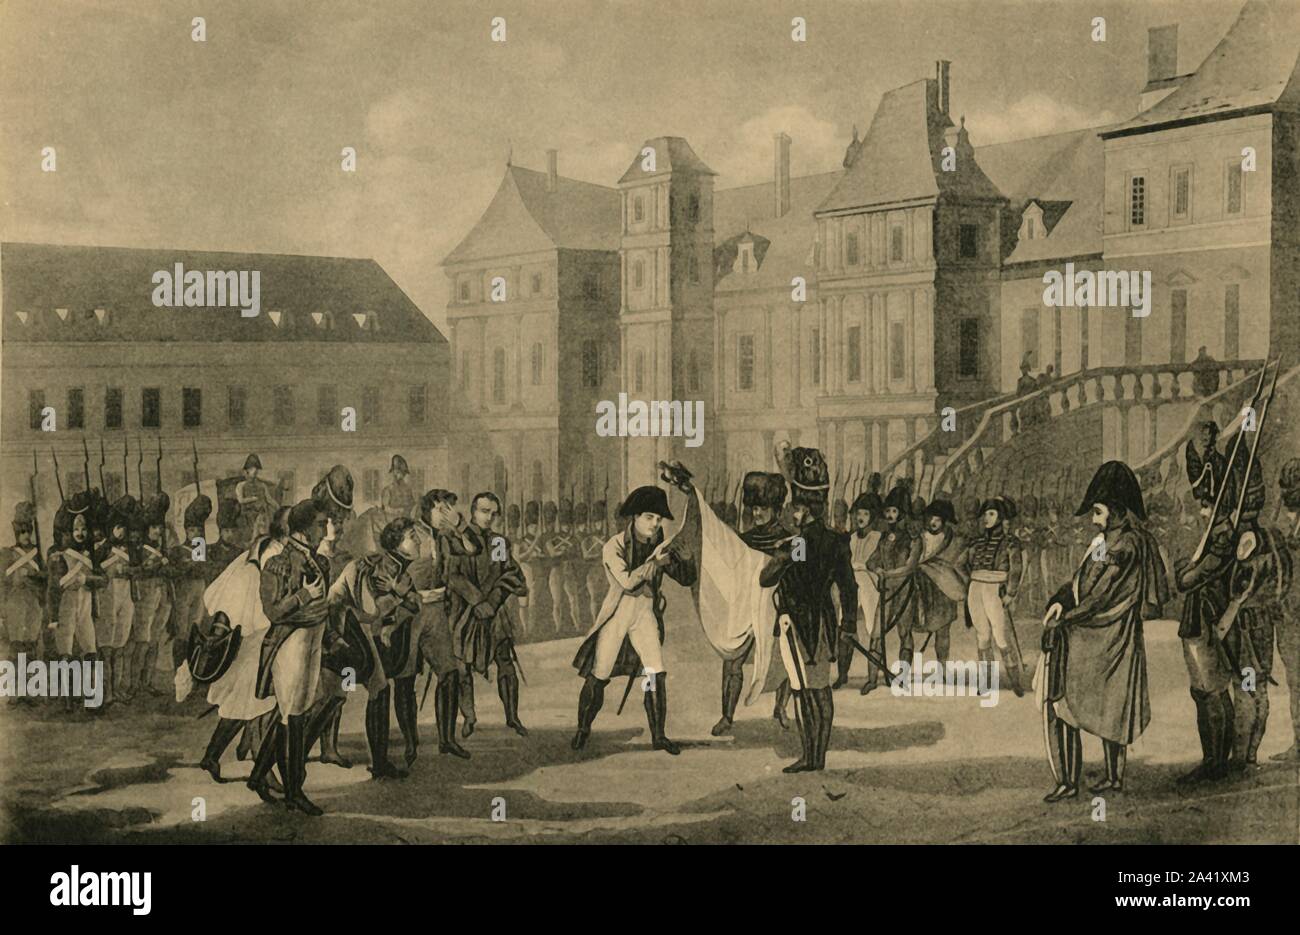 Napoleon's Departure from Fontainebleau, 20 April 1814, (1921). 'Les Adieux De L'Empereur A Son Arm&#xe9;e &#xe0; Fontainebleau'. Emperor Napoleon, standing at the centre of the courtyard of the Palace of Fontainebleau, bids farewell to his Old Guard, and seizes a battle flag presented to him by two soldiers. The defeat at the Battle of Leipzig and the subsequent invasion of France by the Allies culminated in Napoleon's abdication on 11 April. By the Treaty of Fontainebleau he was exiled and granted sovereignty of the island of Elba. Engraving made in 1815. From &quot;Napoleon&quot;, by Raymon Stock Photo